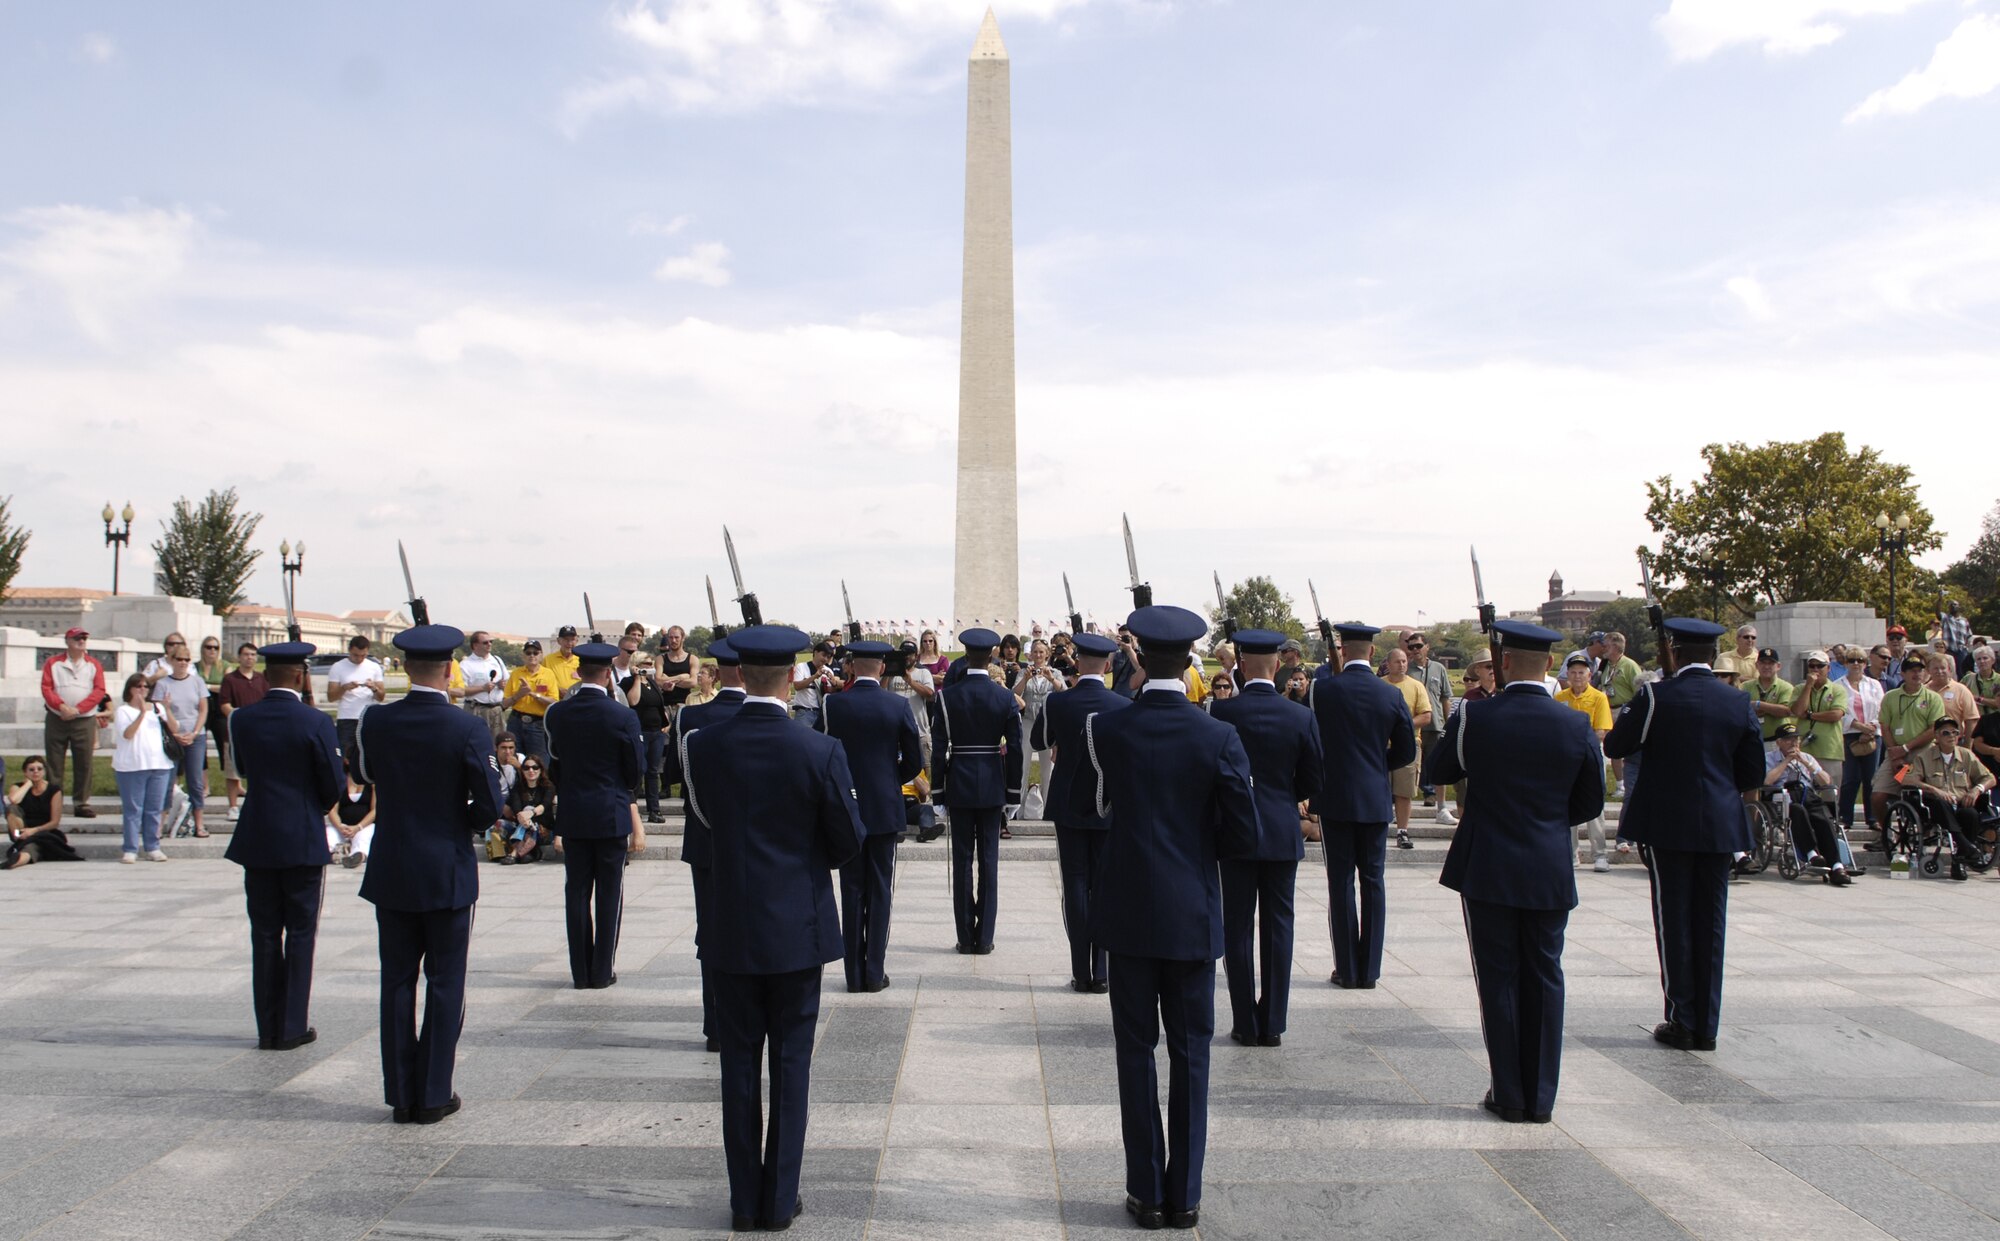 Members of the U.S. Air Force Honor Guard Drill Team stand ready to perform for a crowd Sept. 17 at the World War II Memorial in Washington. The show was a tribute to World War II veterans in attendance and to honor those that lost their lives during World War II. (U.S. Air Force photo by Airman 1st Class Sean Adams)